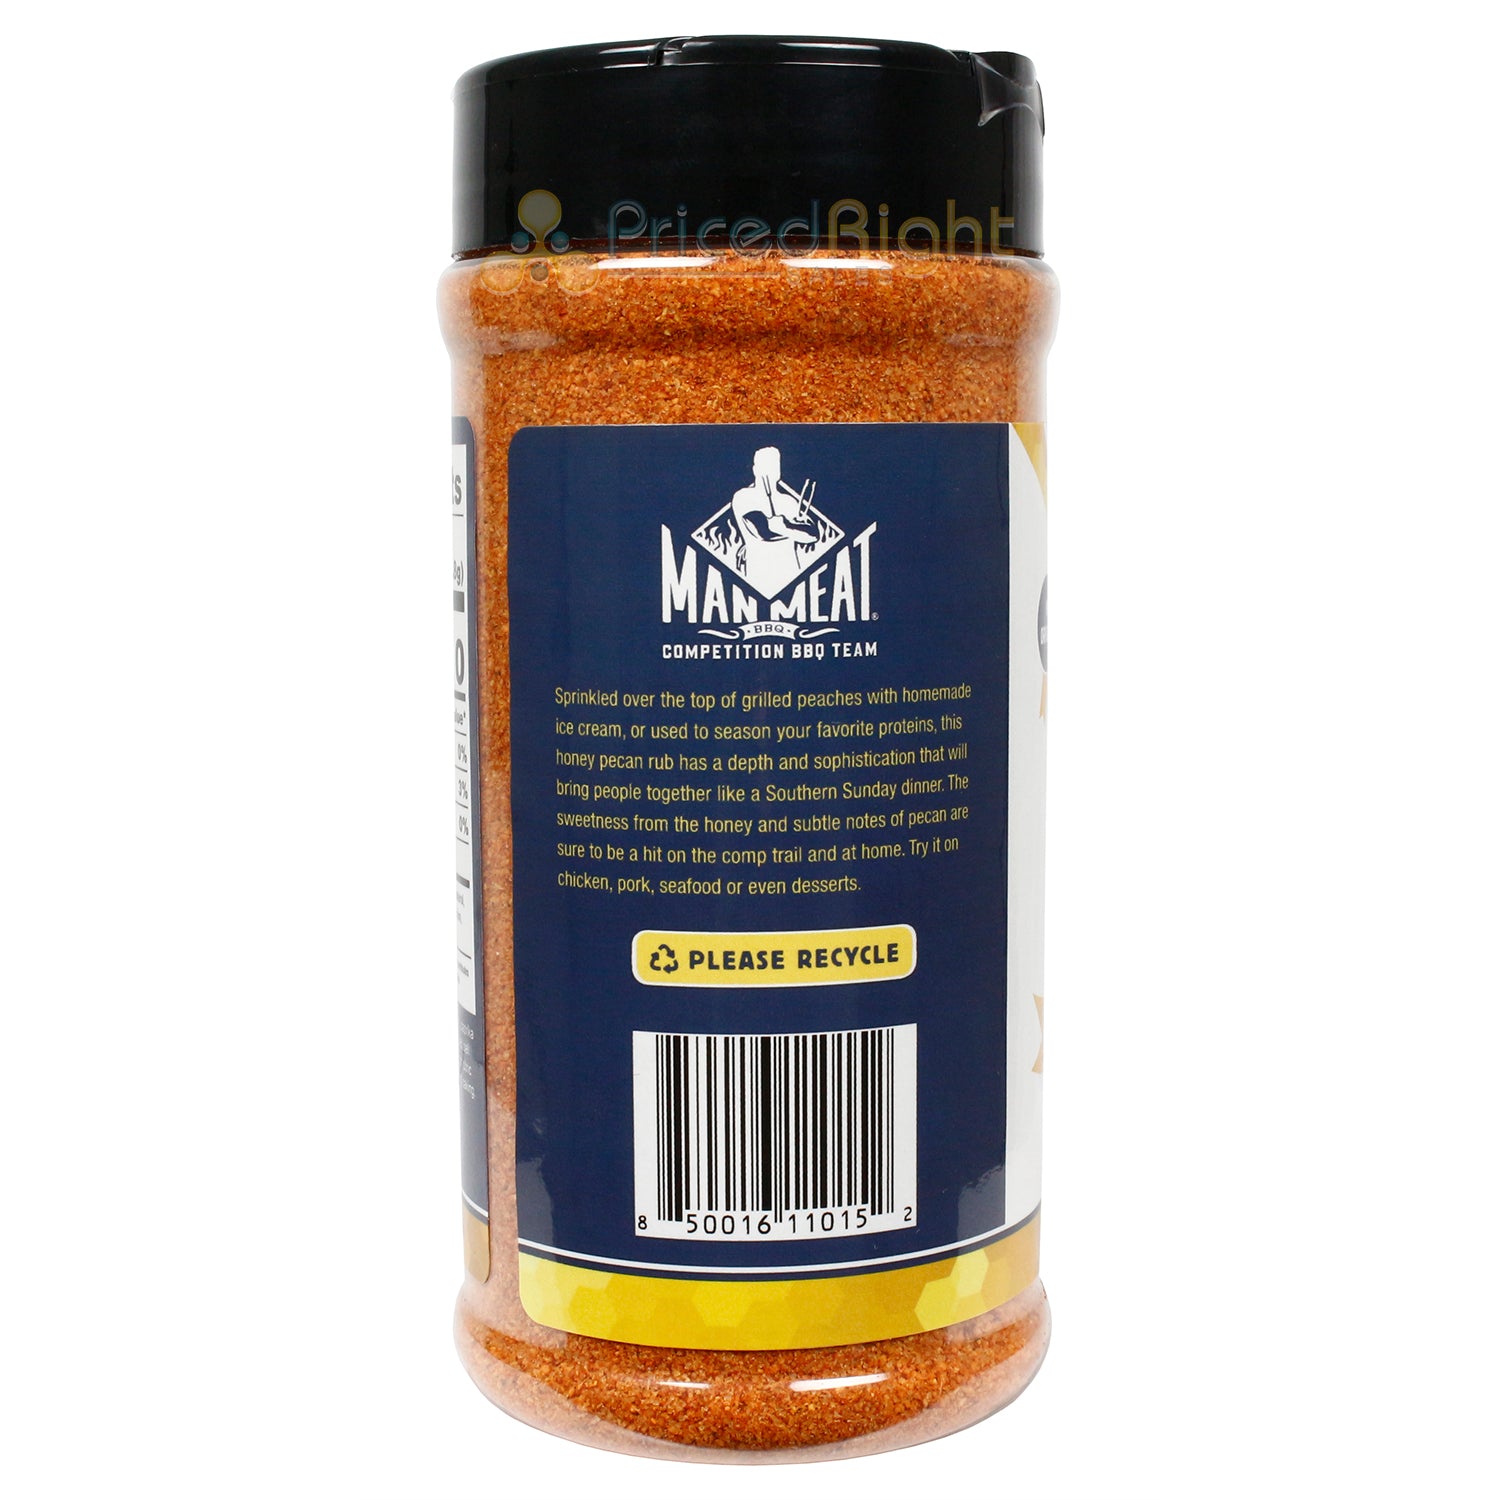 Man Meat BBQ The Real Southern Style Honey Pecan Rub Award Winning 11 Ounce